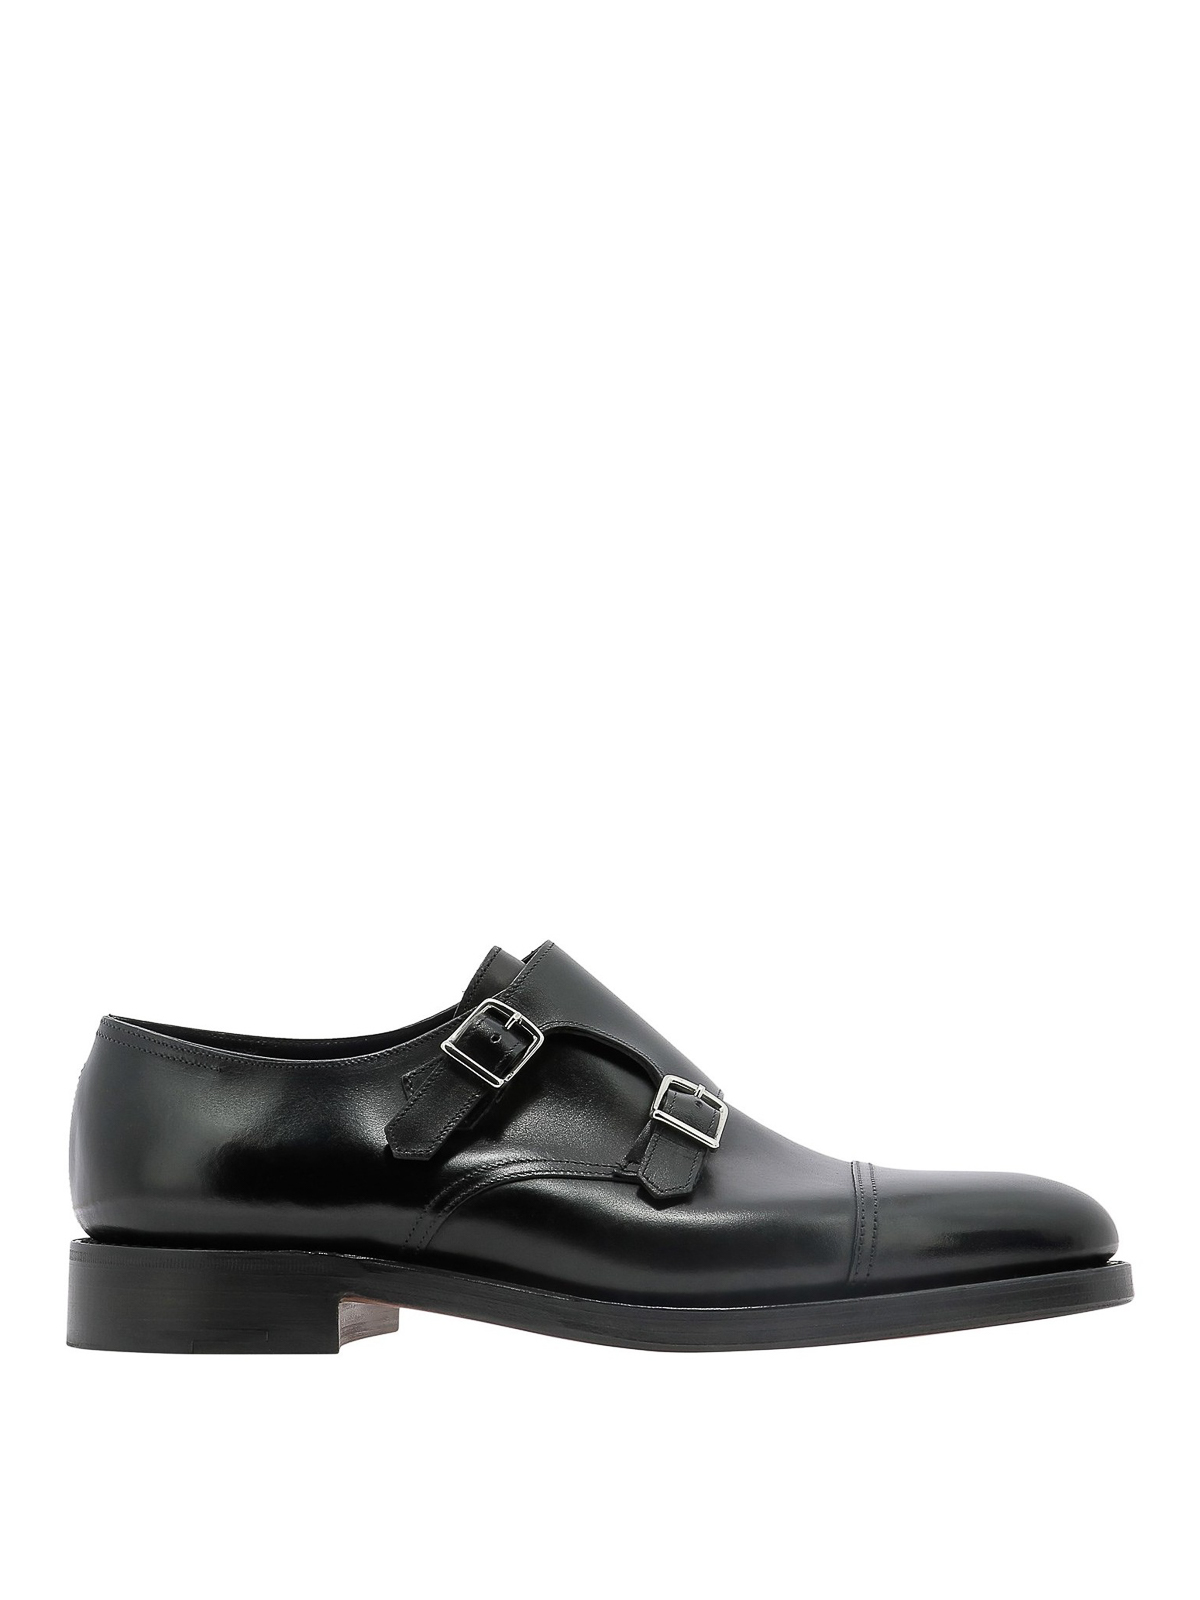 Loafers & Slippers John Lobb - William PD Derby shoes - 228032LBLACK1RBLACK